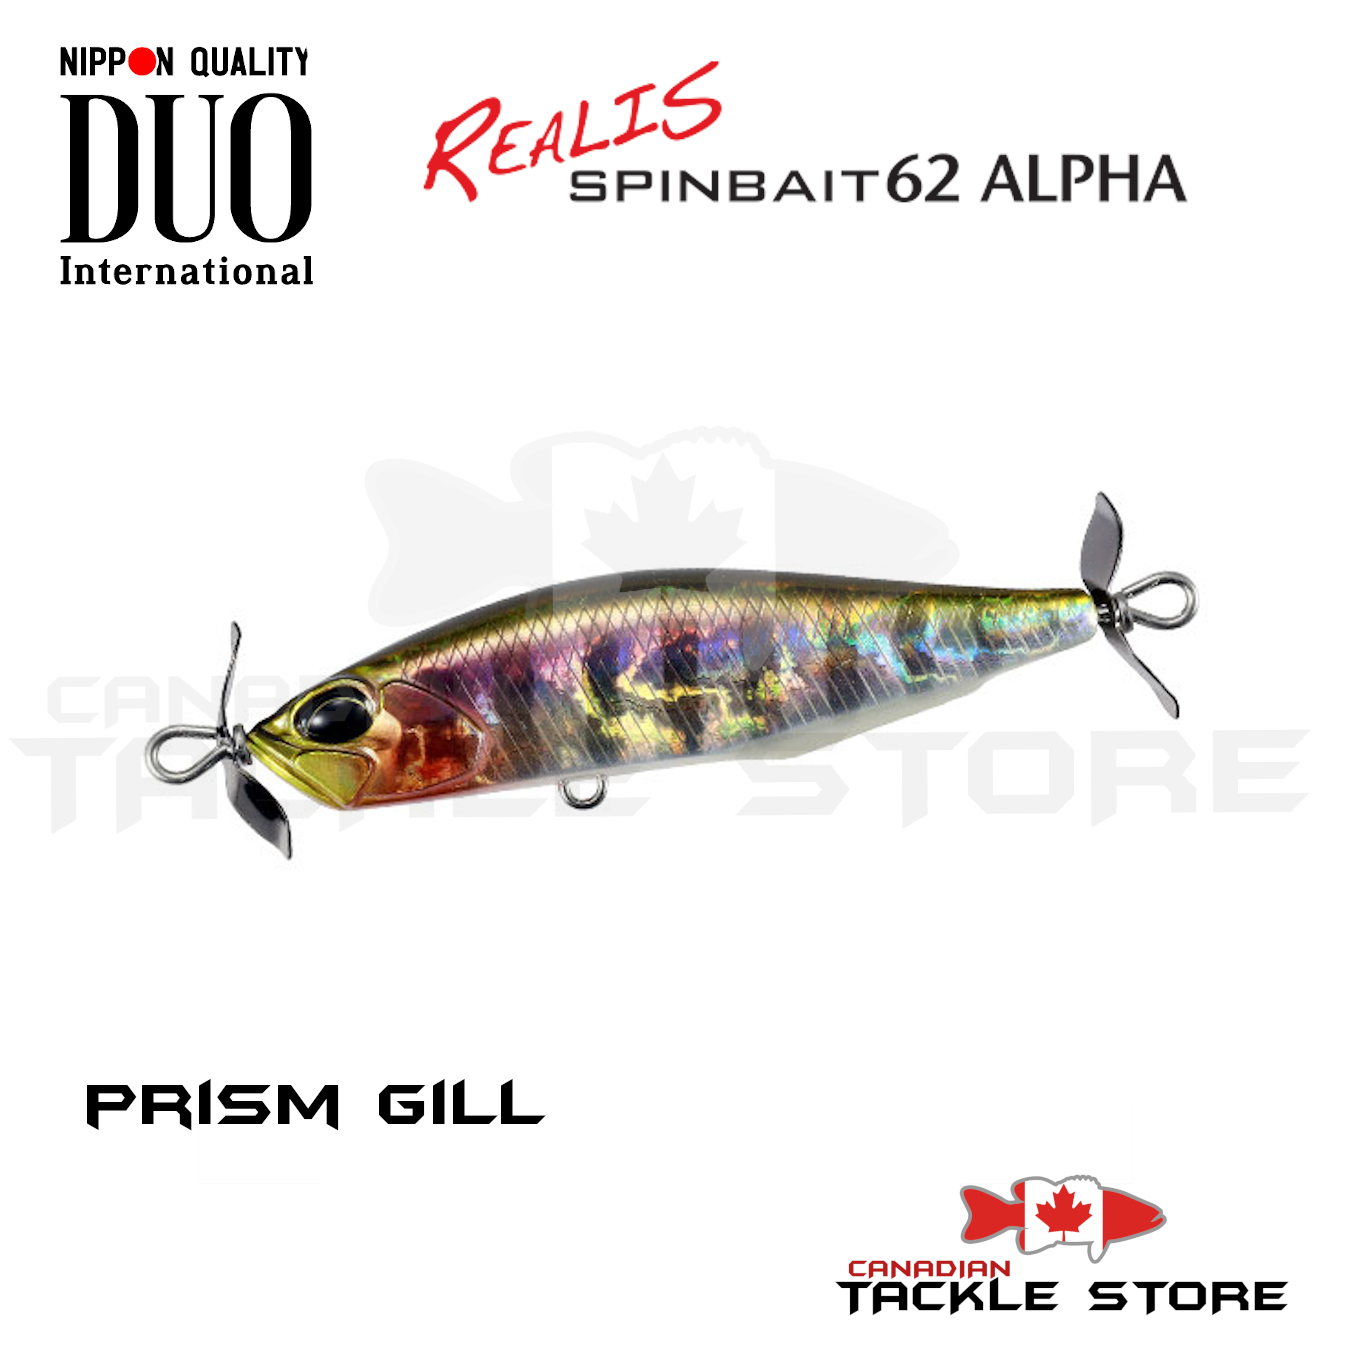 Lures in Motion: Realis Spinbait 62 Alpha 